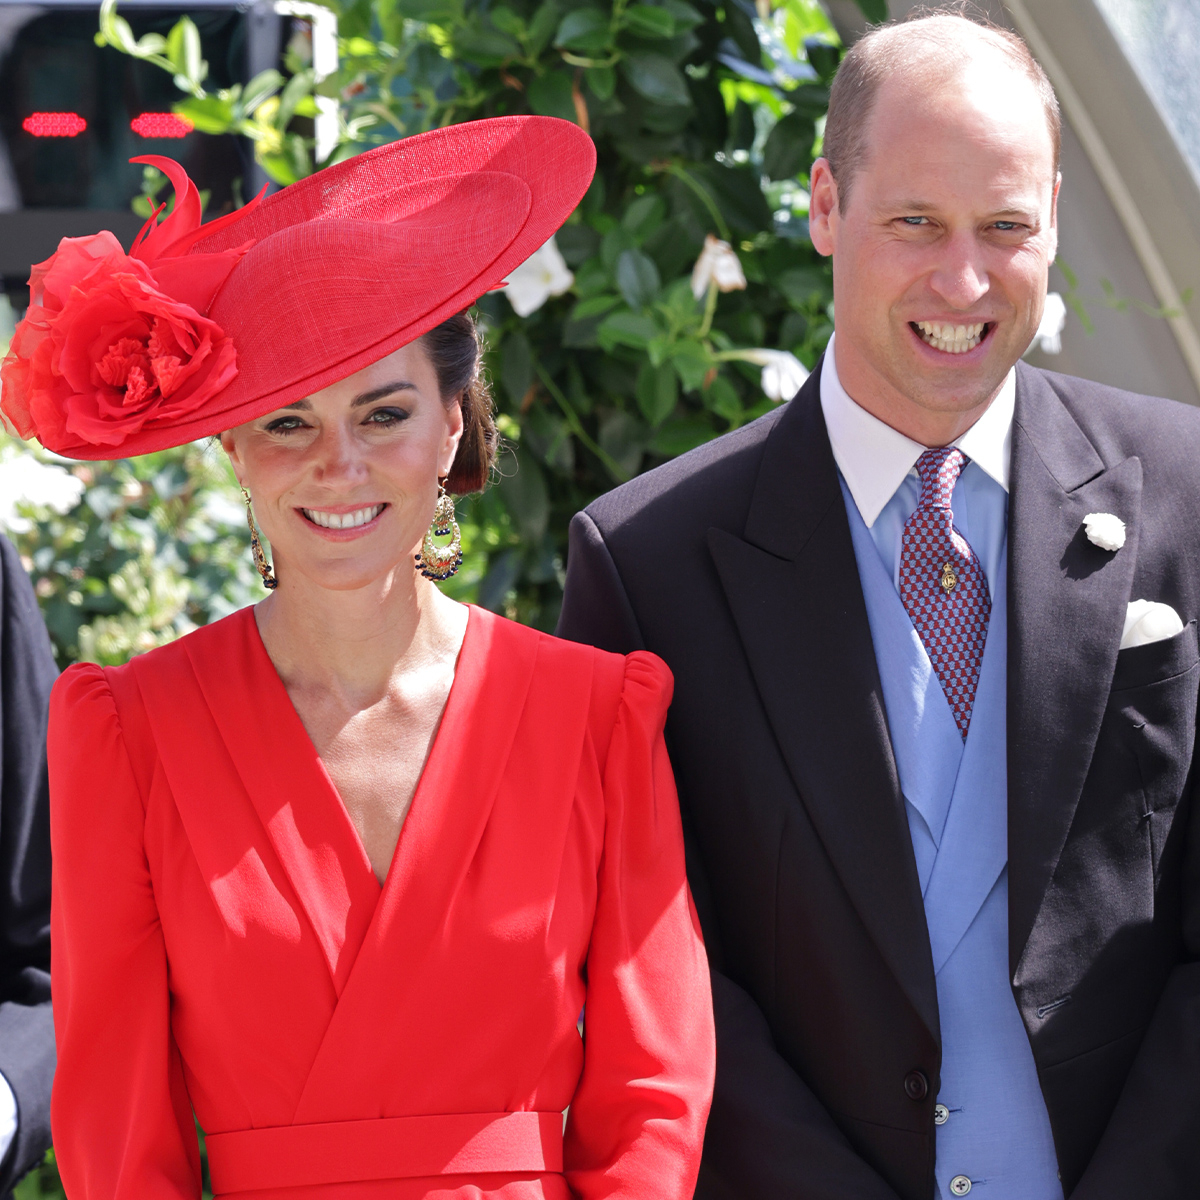 Head-turning wedding hats at Kate Middleton and Prince William's wedding -  pictures